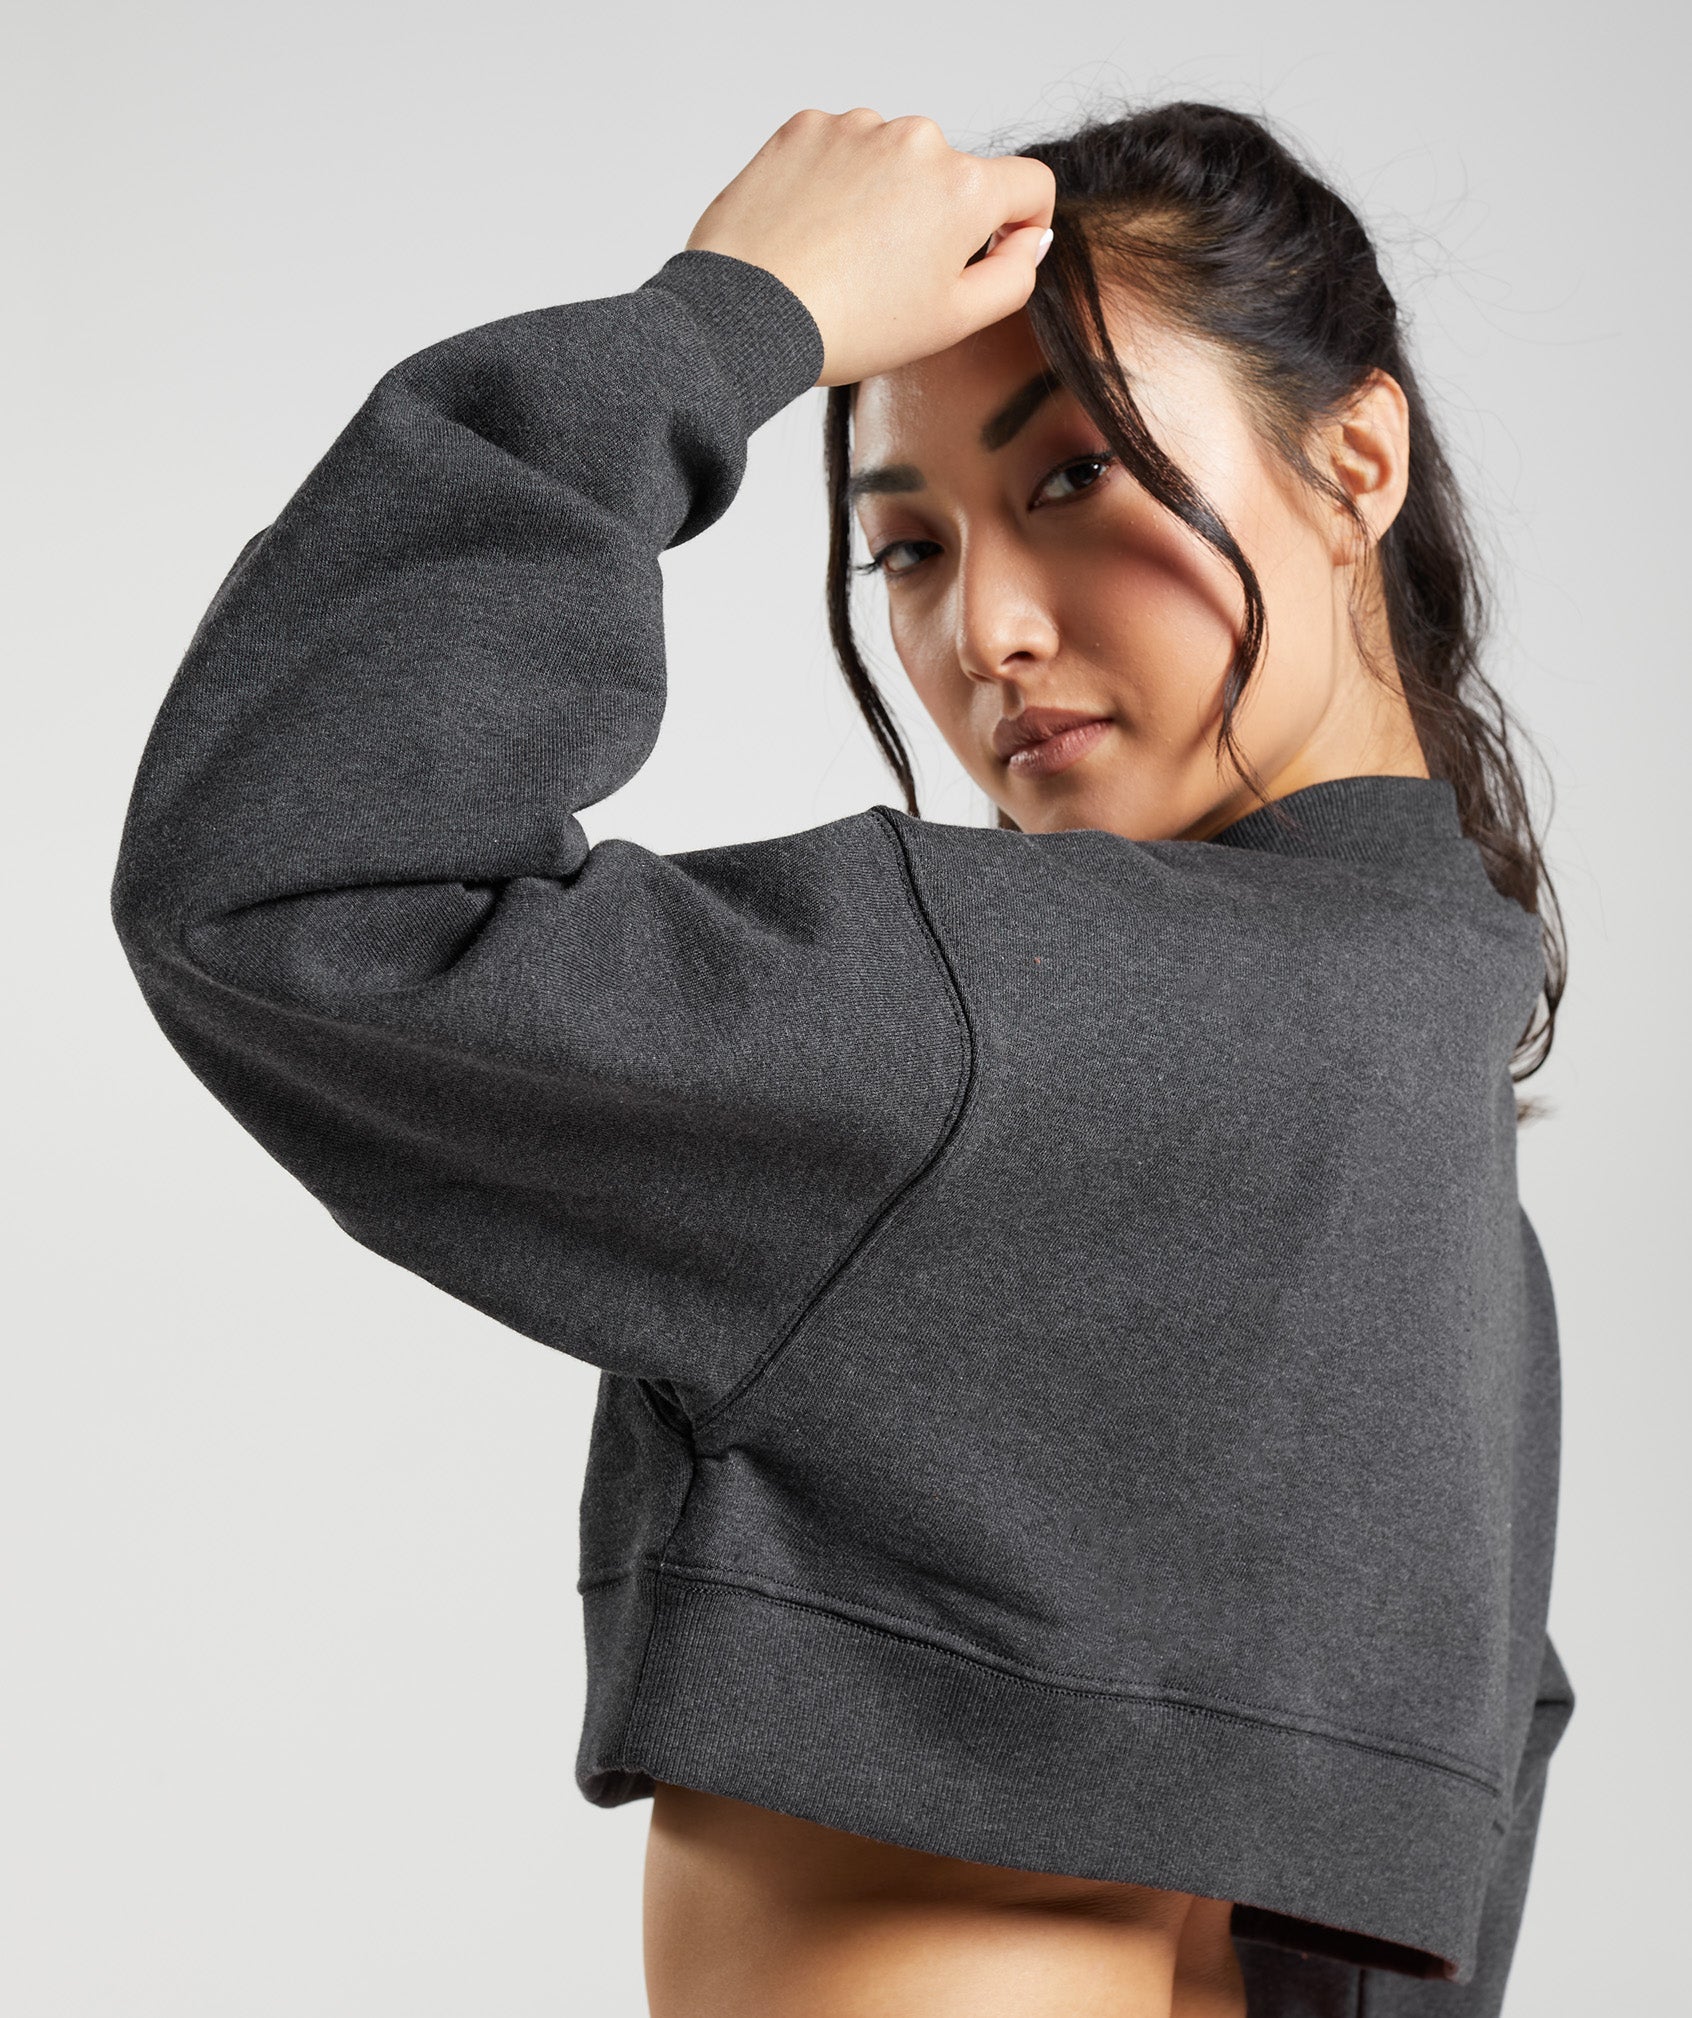 Rest Day Sweats Cropped Pullover in Black Core Marl